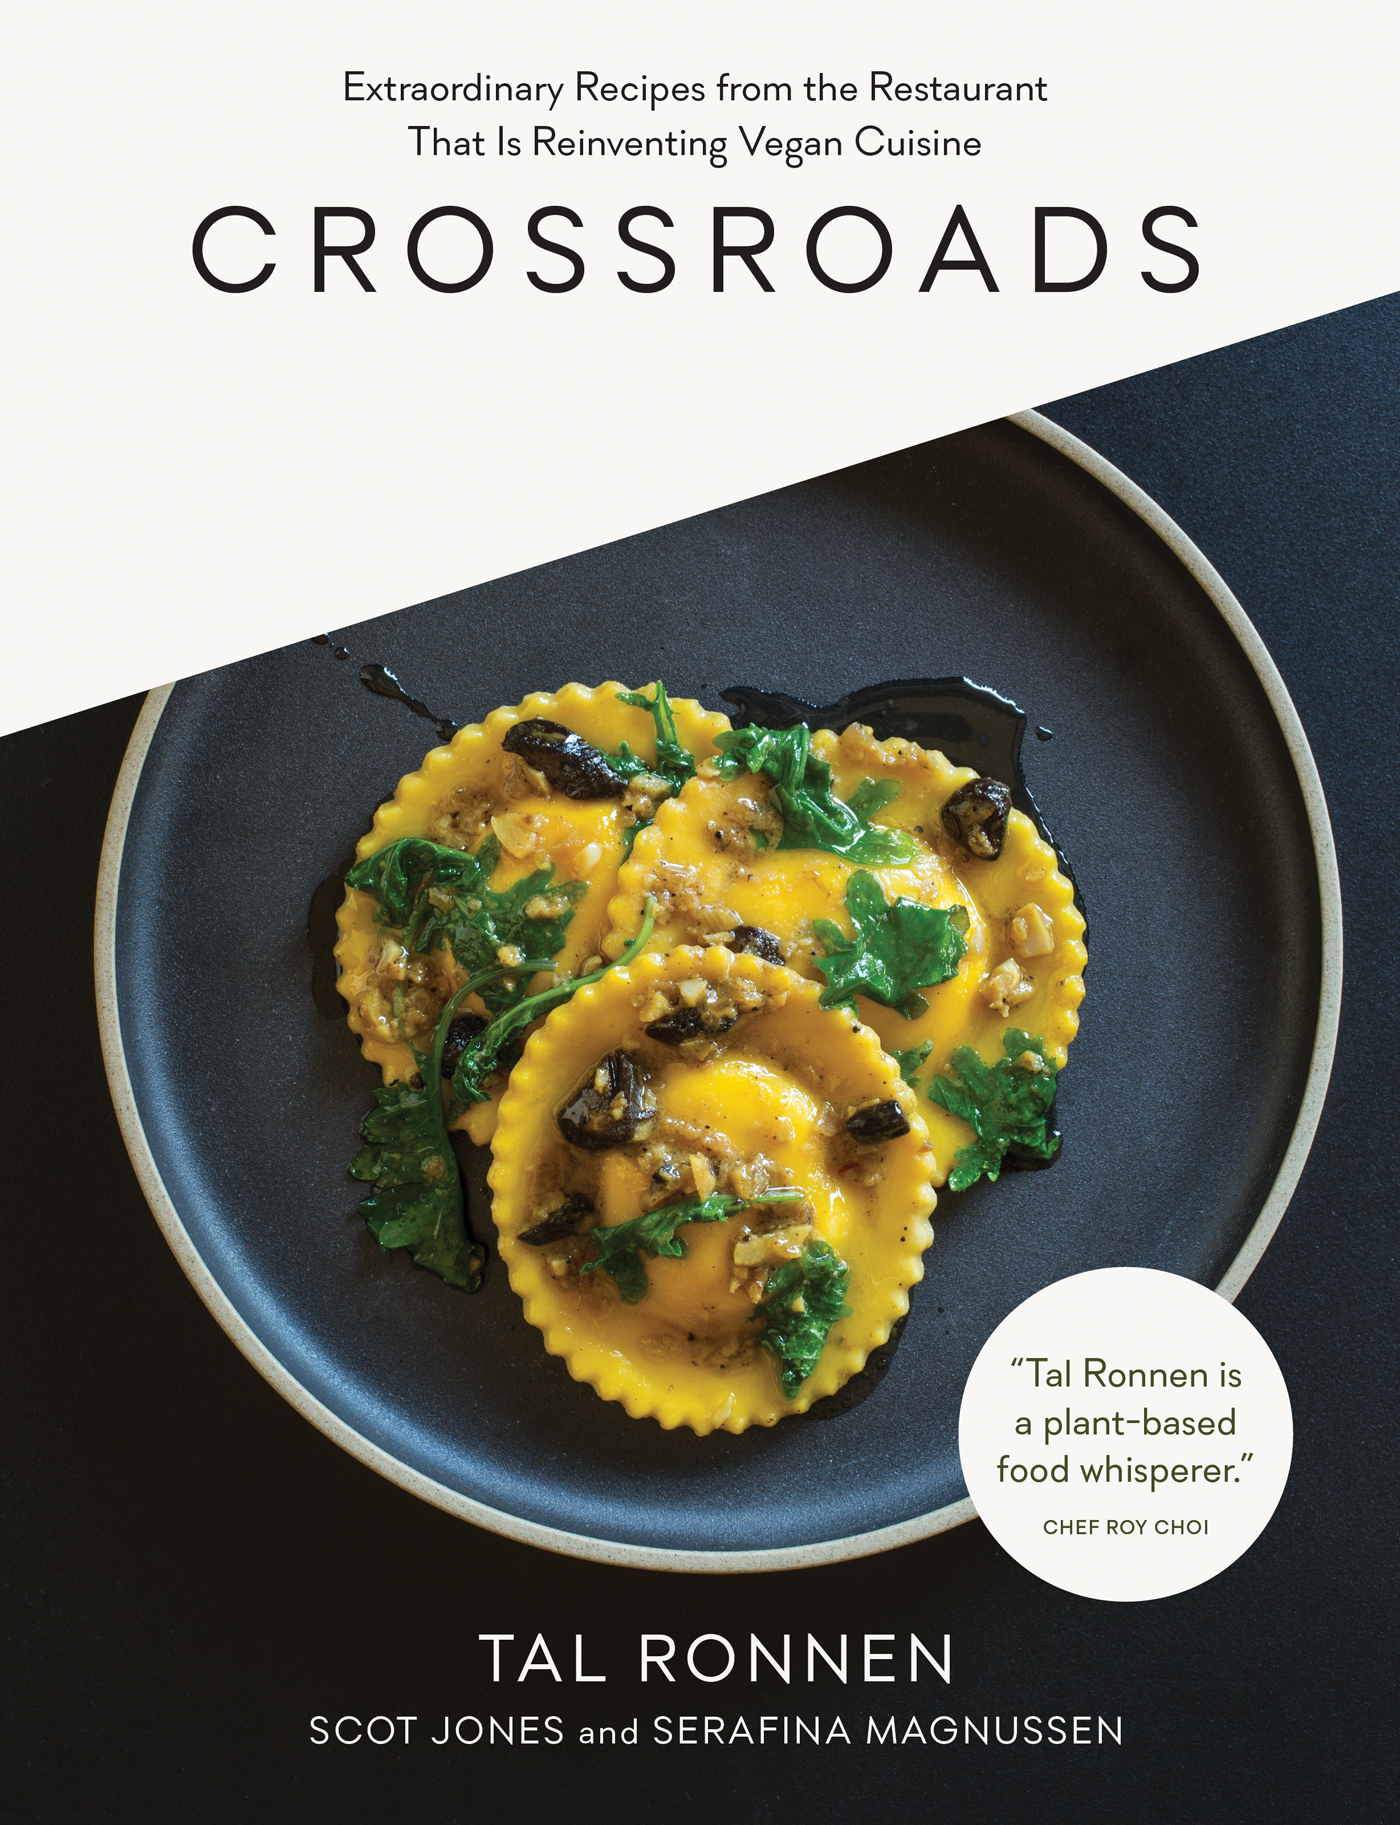 Crossroads Extraordinary Recipes from the Restaurant That Is Reinventing Vegan Cuisine - image 1